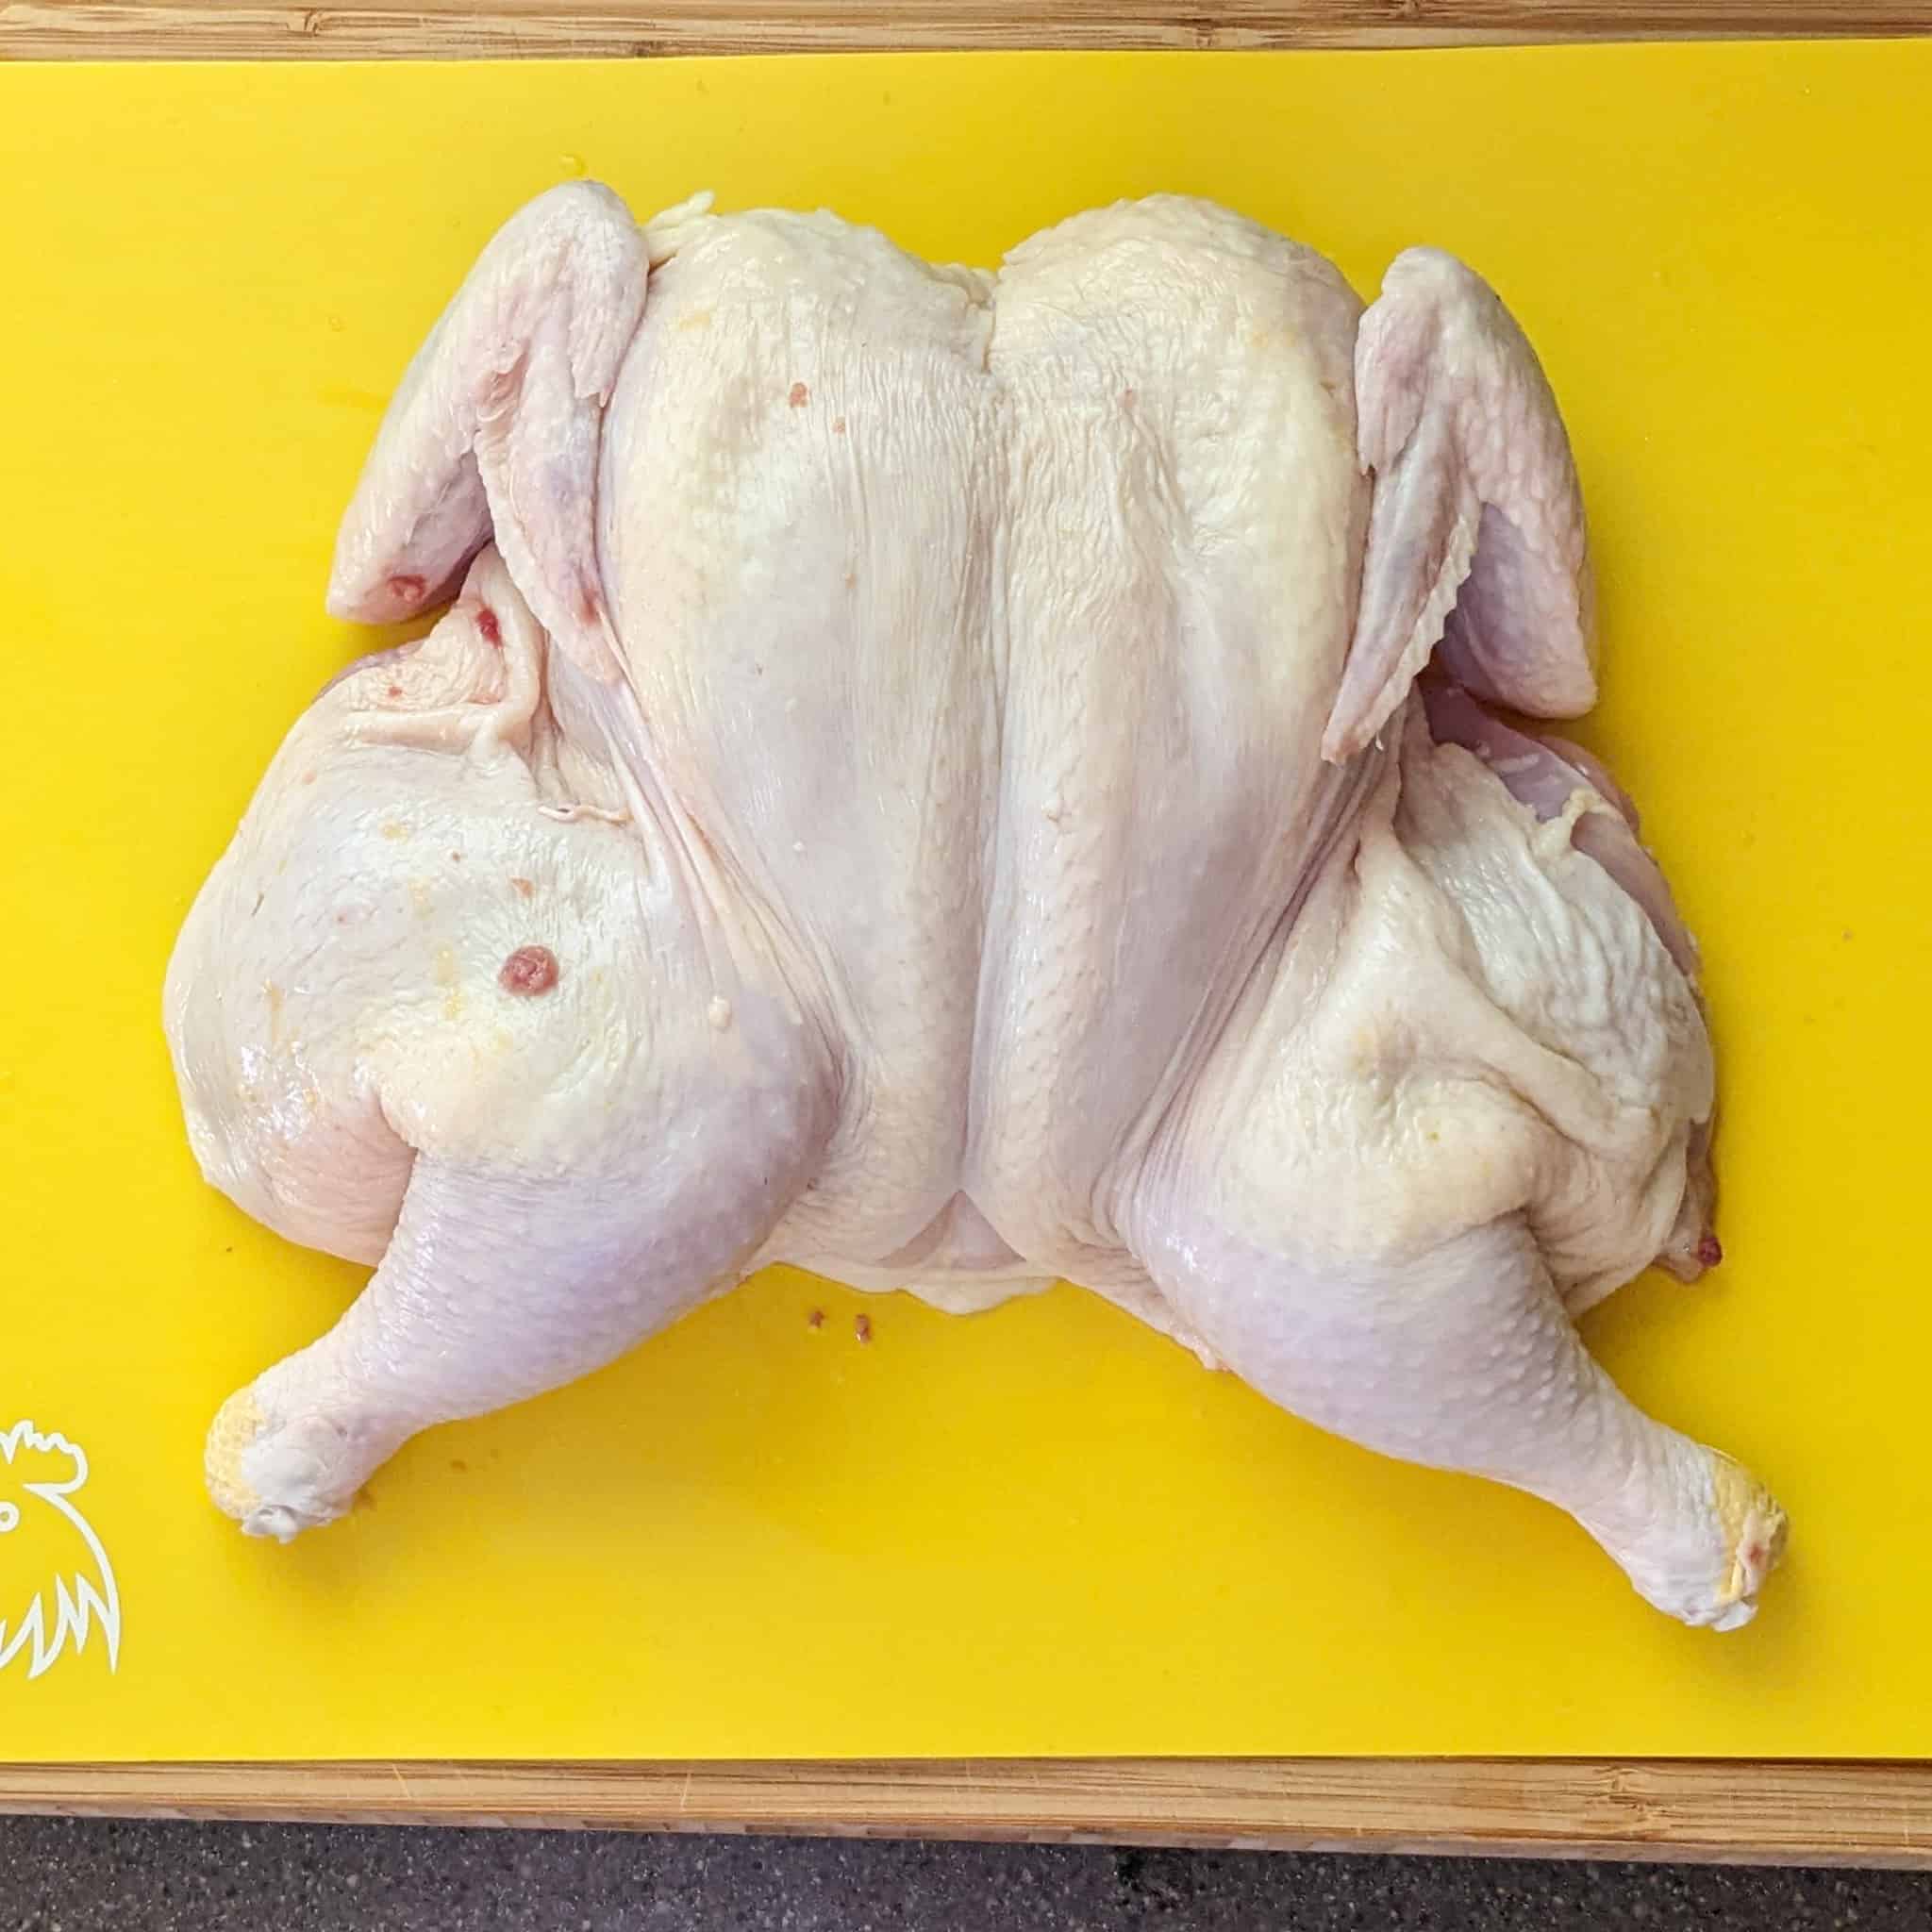 Finish product, a spatchcock chicken that has been flatten breast side up on a cutting board for poultry